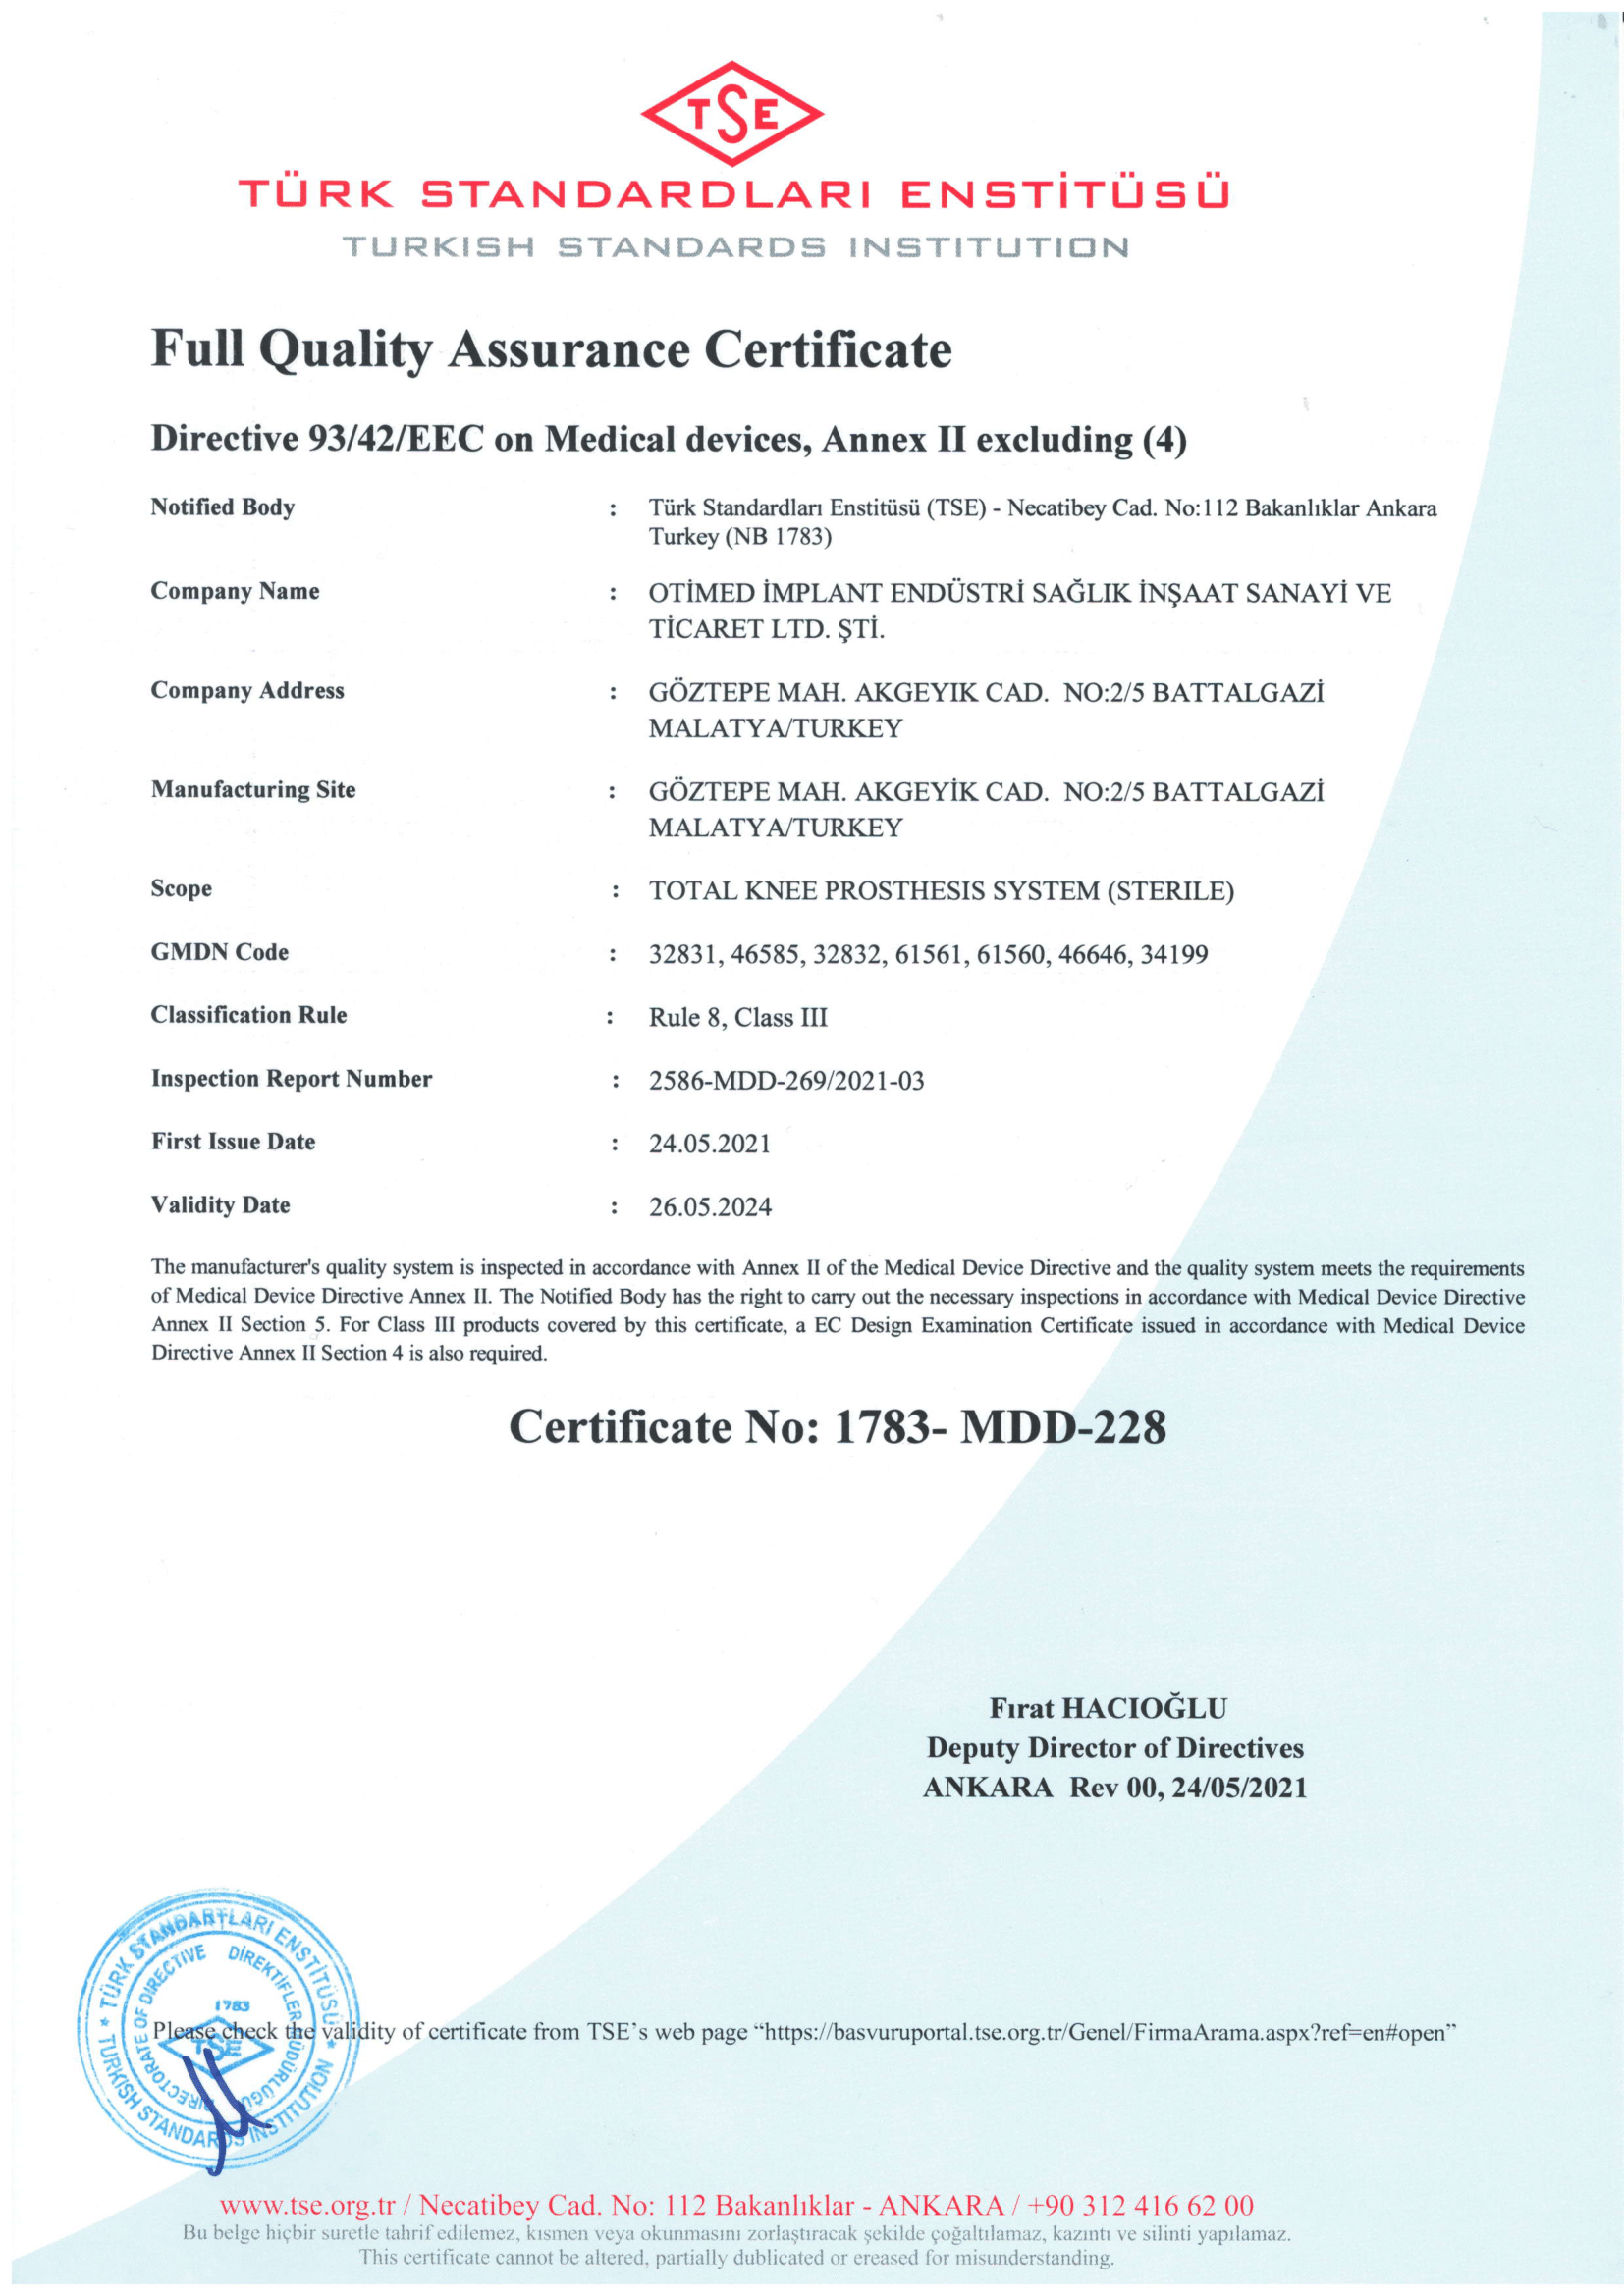 Knee.Prosthesis-Full Quality Assurance Certificate